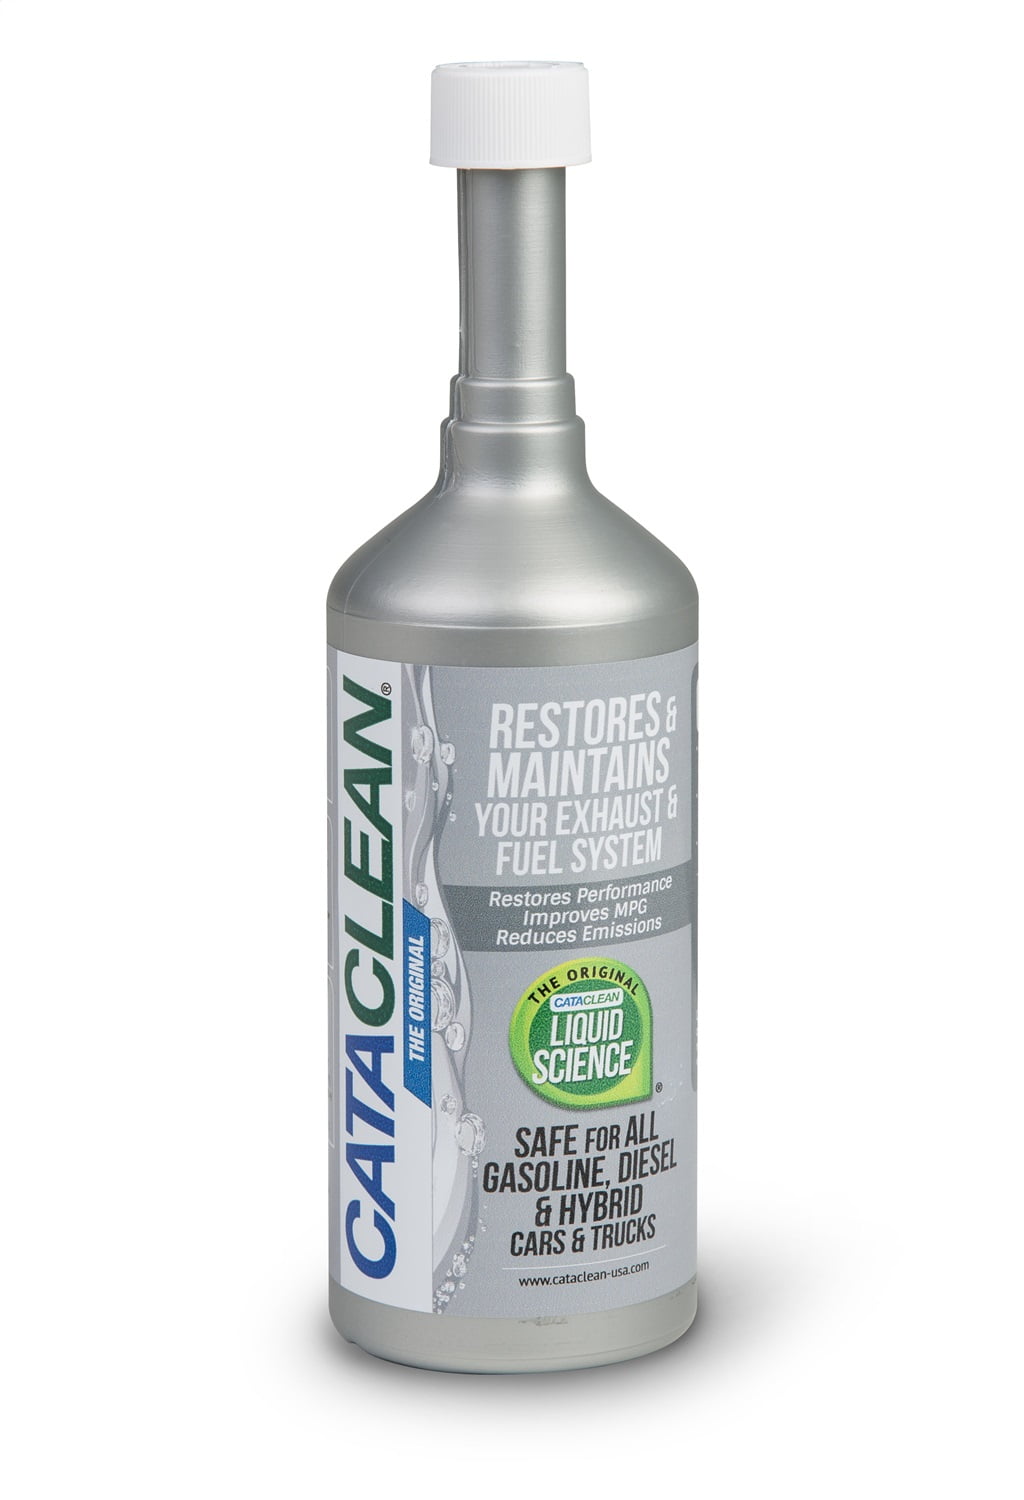 CATACLEAN EXHAUST & FUEL SYSTEM CLEANER. Full product review on my